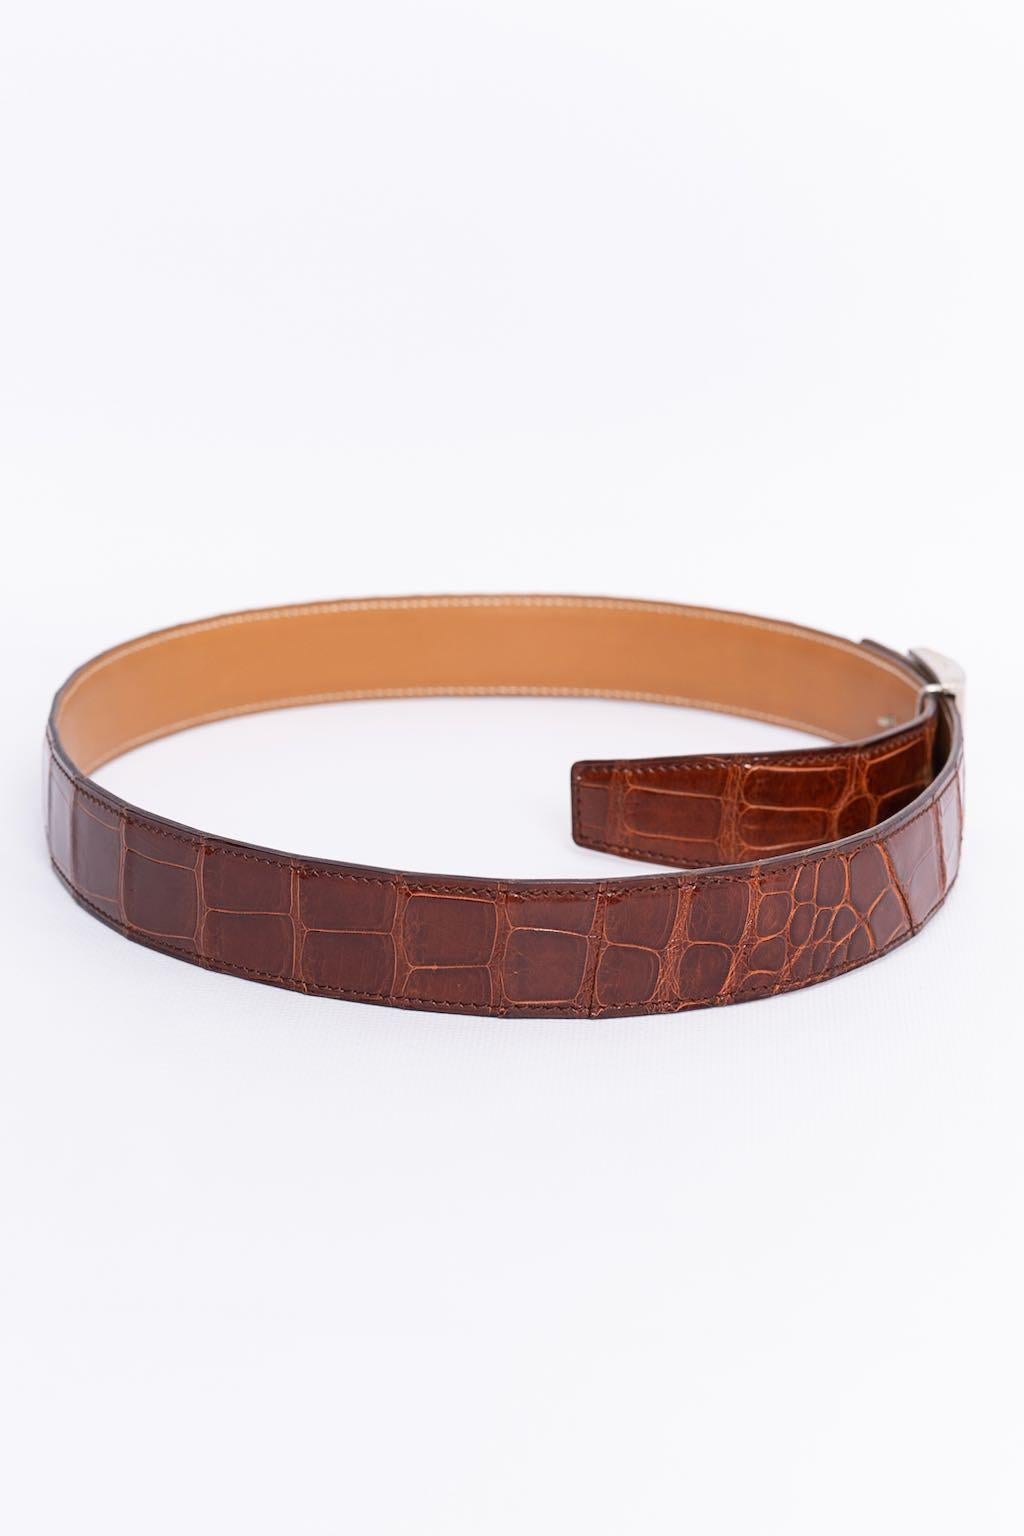 Women's or Men's Hermes Belt in Crocodile and Brown Leather For Sale